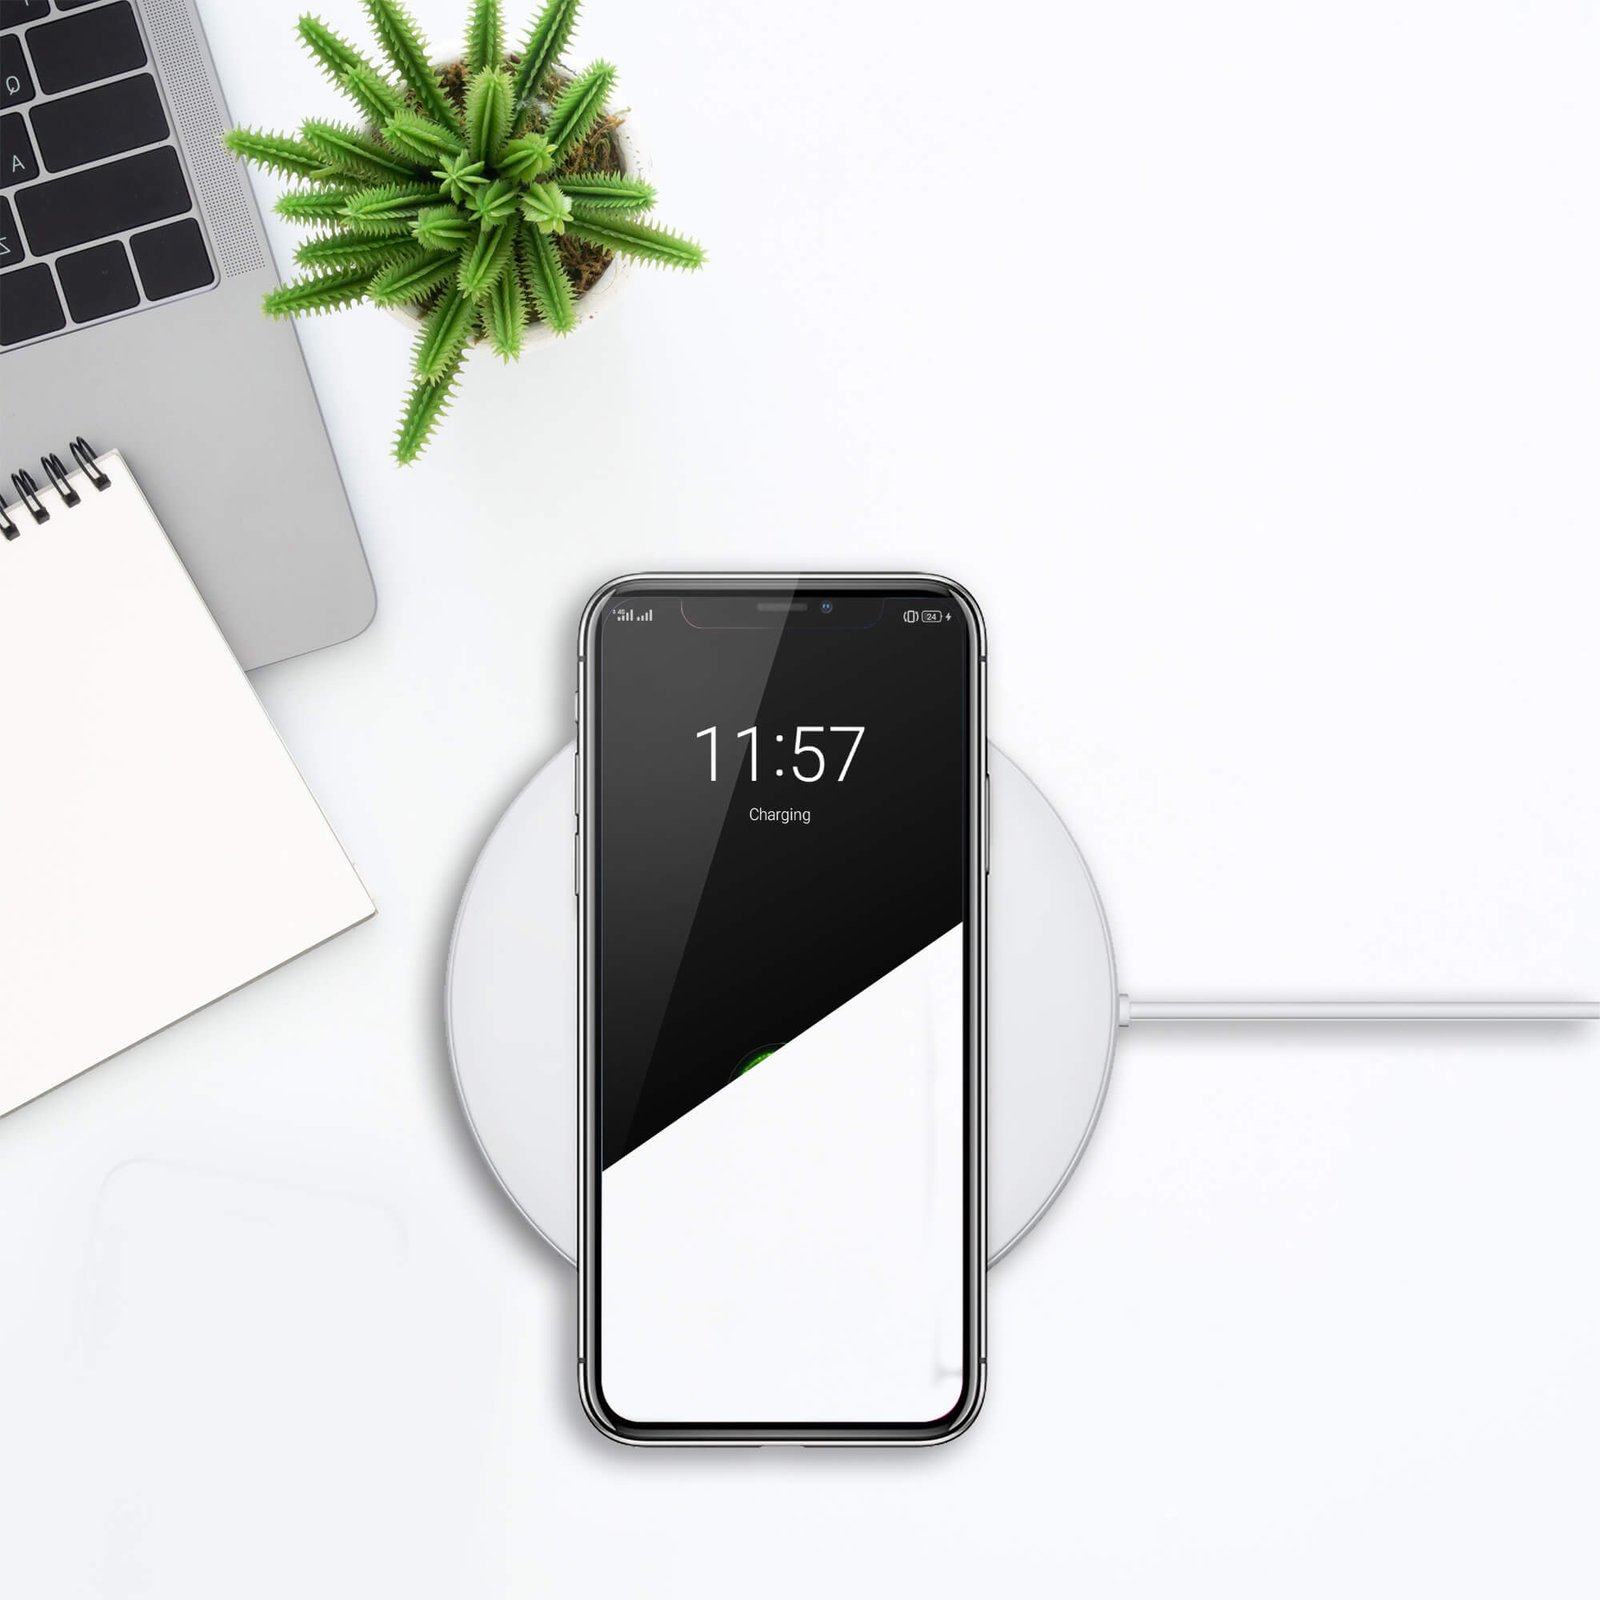 Editable Free Wireless Charger Mockup PSD Template